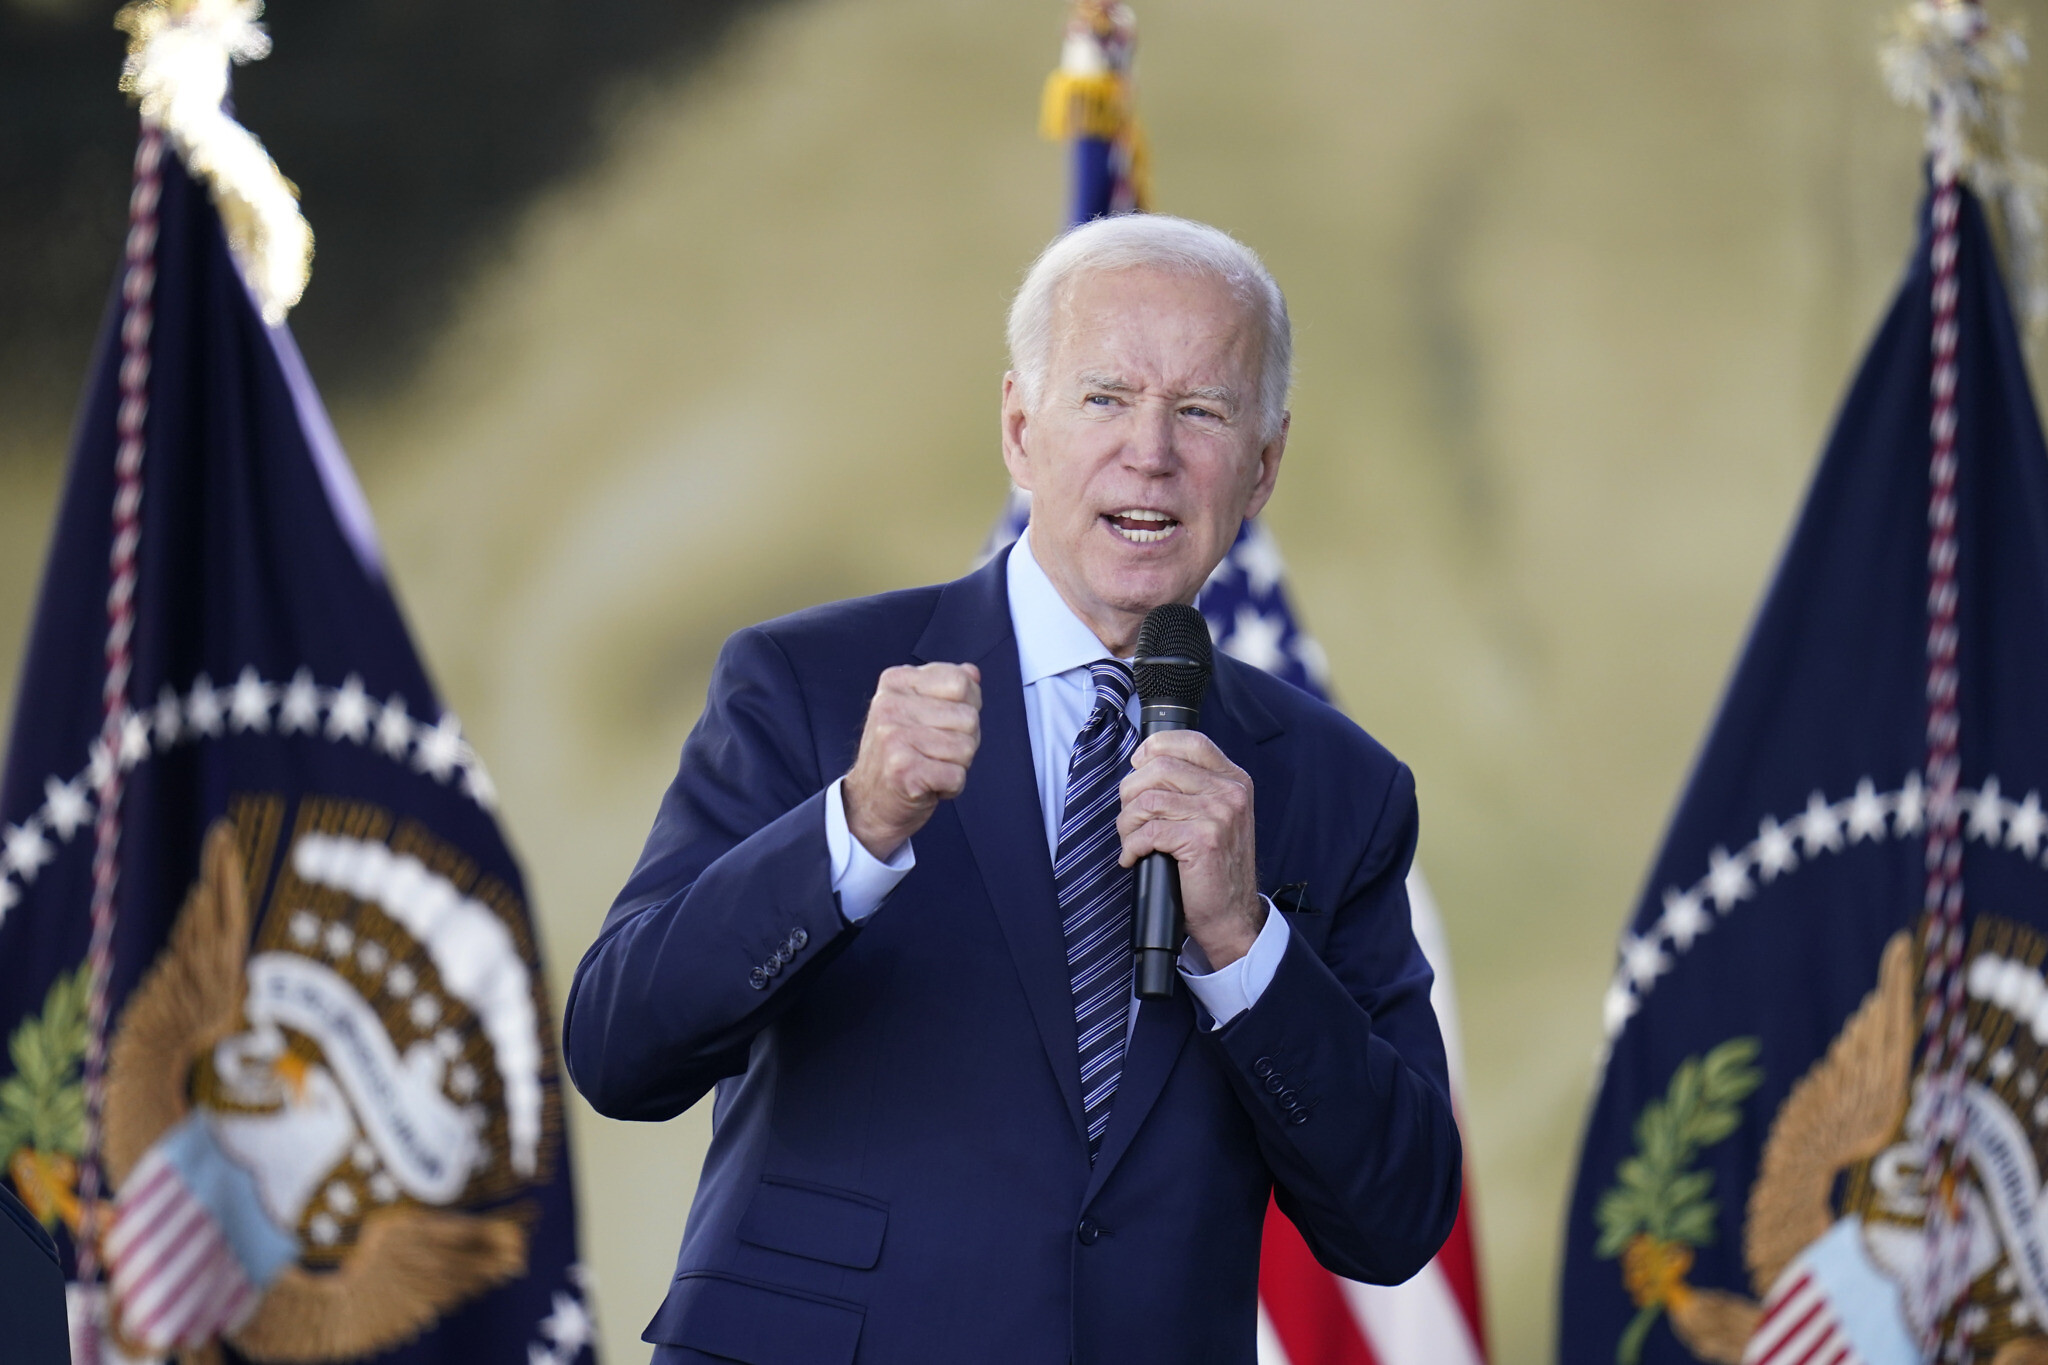 Til ære for Bedre sne Facing tough midterms, Biden says feeling 'really good' about Democrats'  chances | The Times of Israel